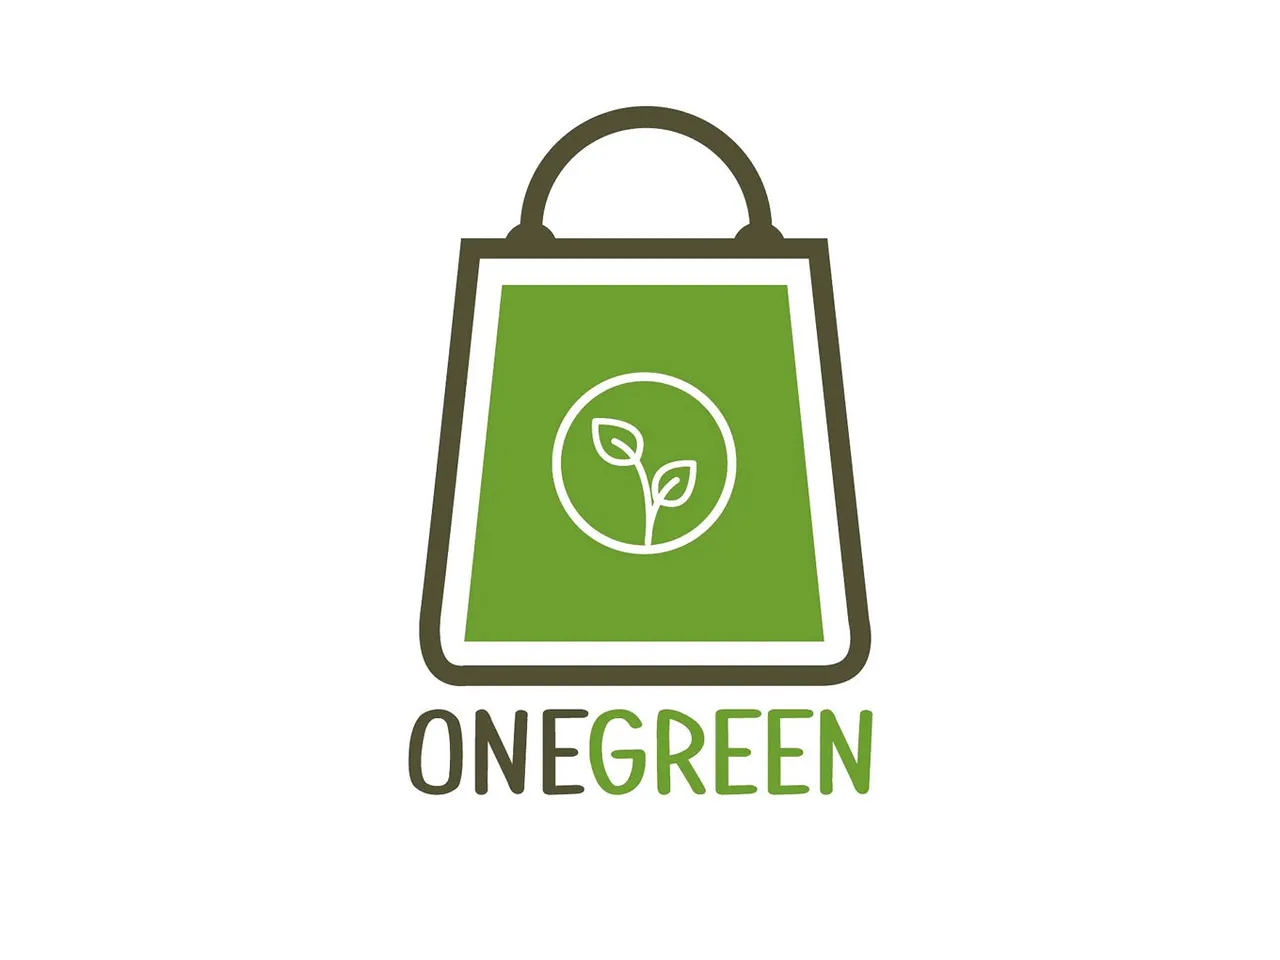 Eco-friendly eCommerce startup OneGreen raises $2M in funding led by Venture Catalysts, others